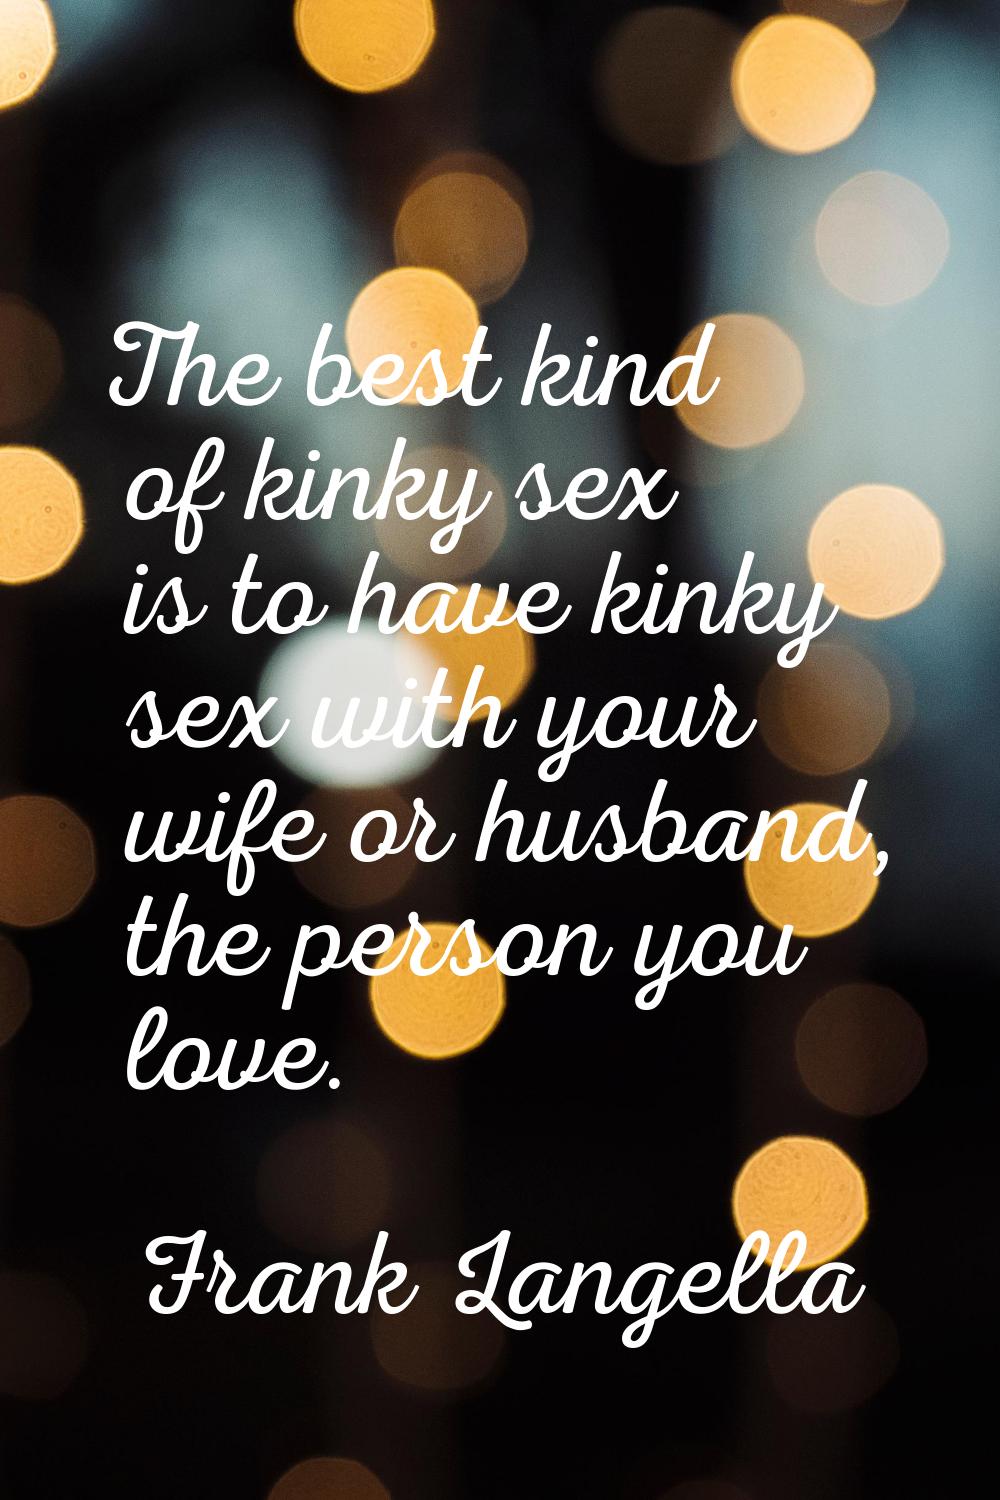 The best kind of kinky sex is to have kinky sex with your wife or husband, the person you love.